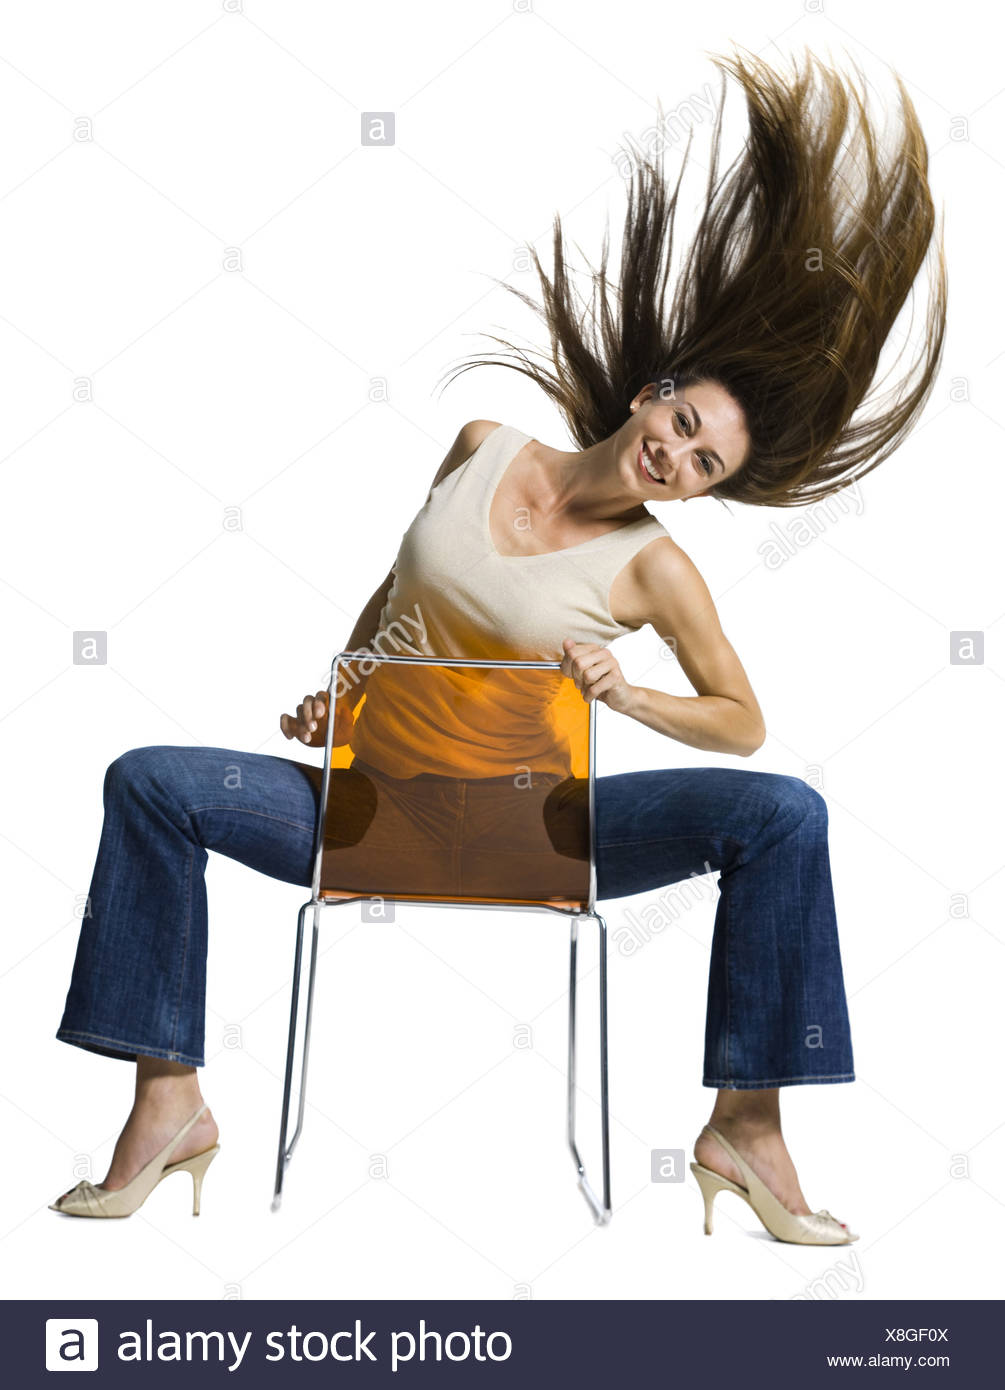 Woman sitting backwards on chair and tossing hair - Stock Image.